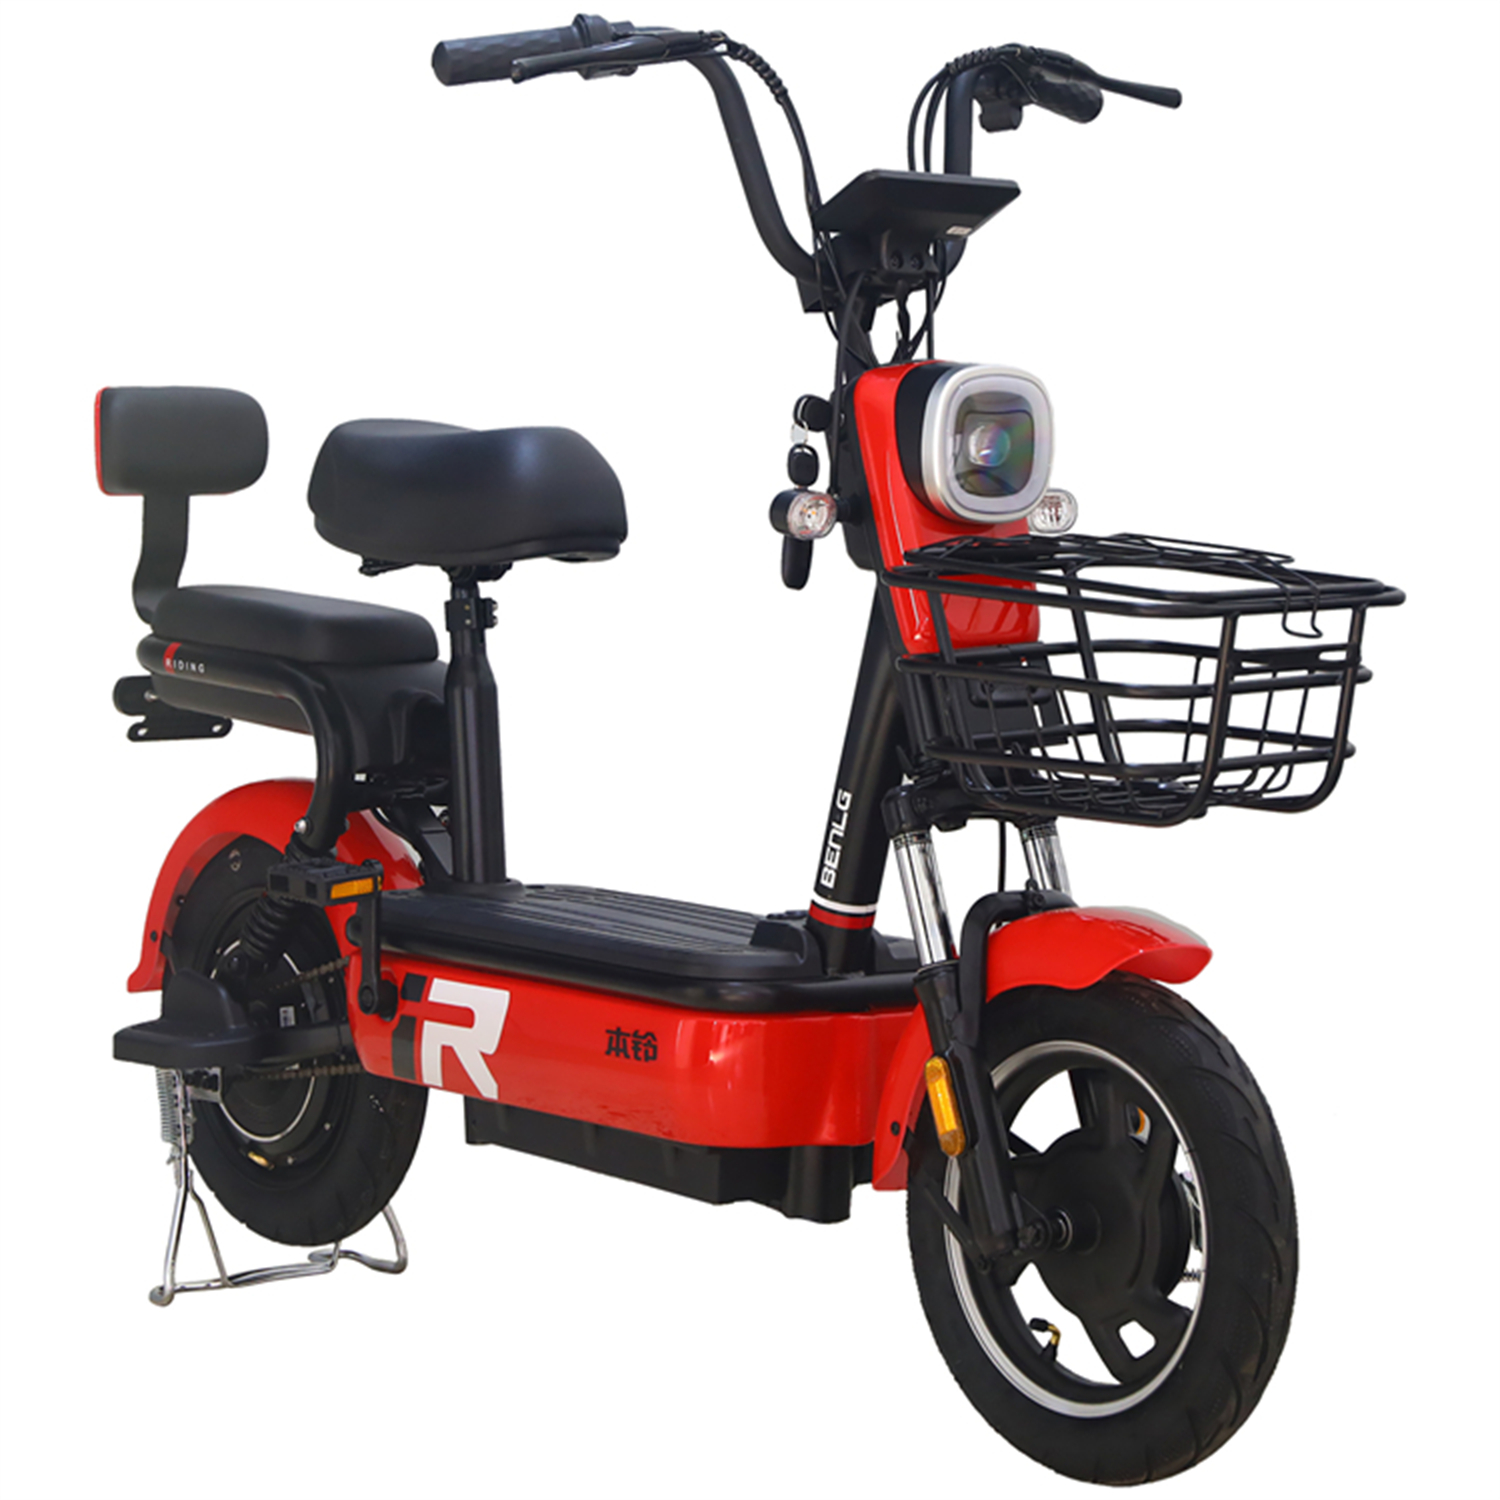 Benlg Bentley 48V PREFACE Electric 2 Wheels Bicycle for Adults, red